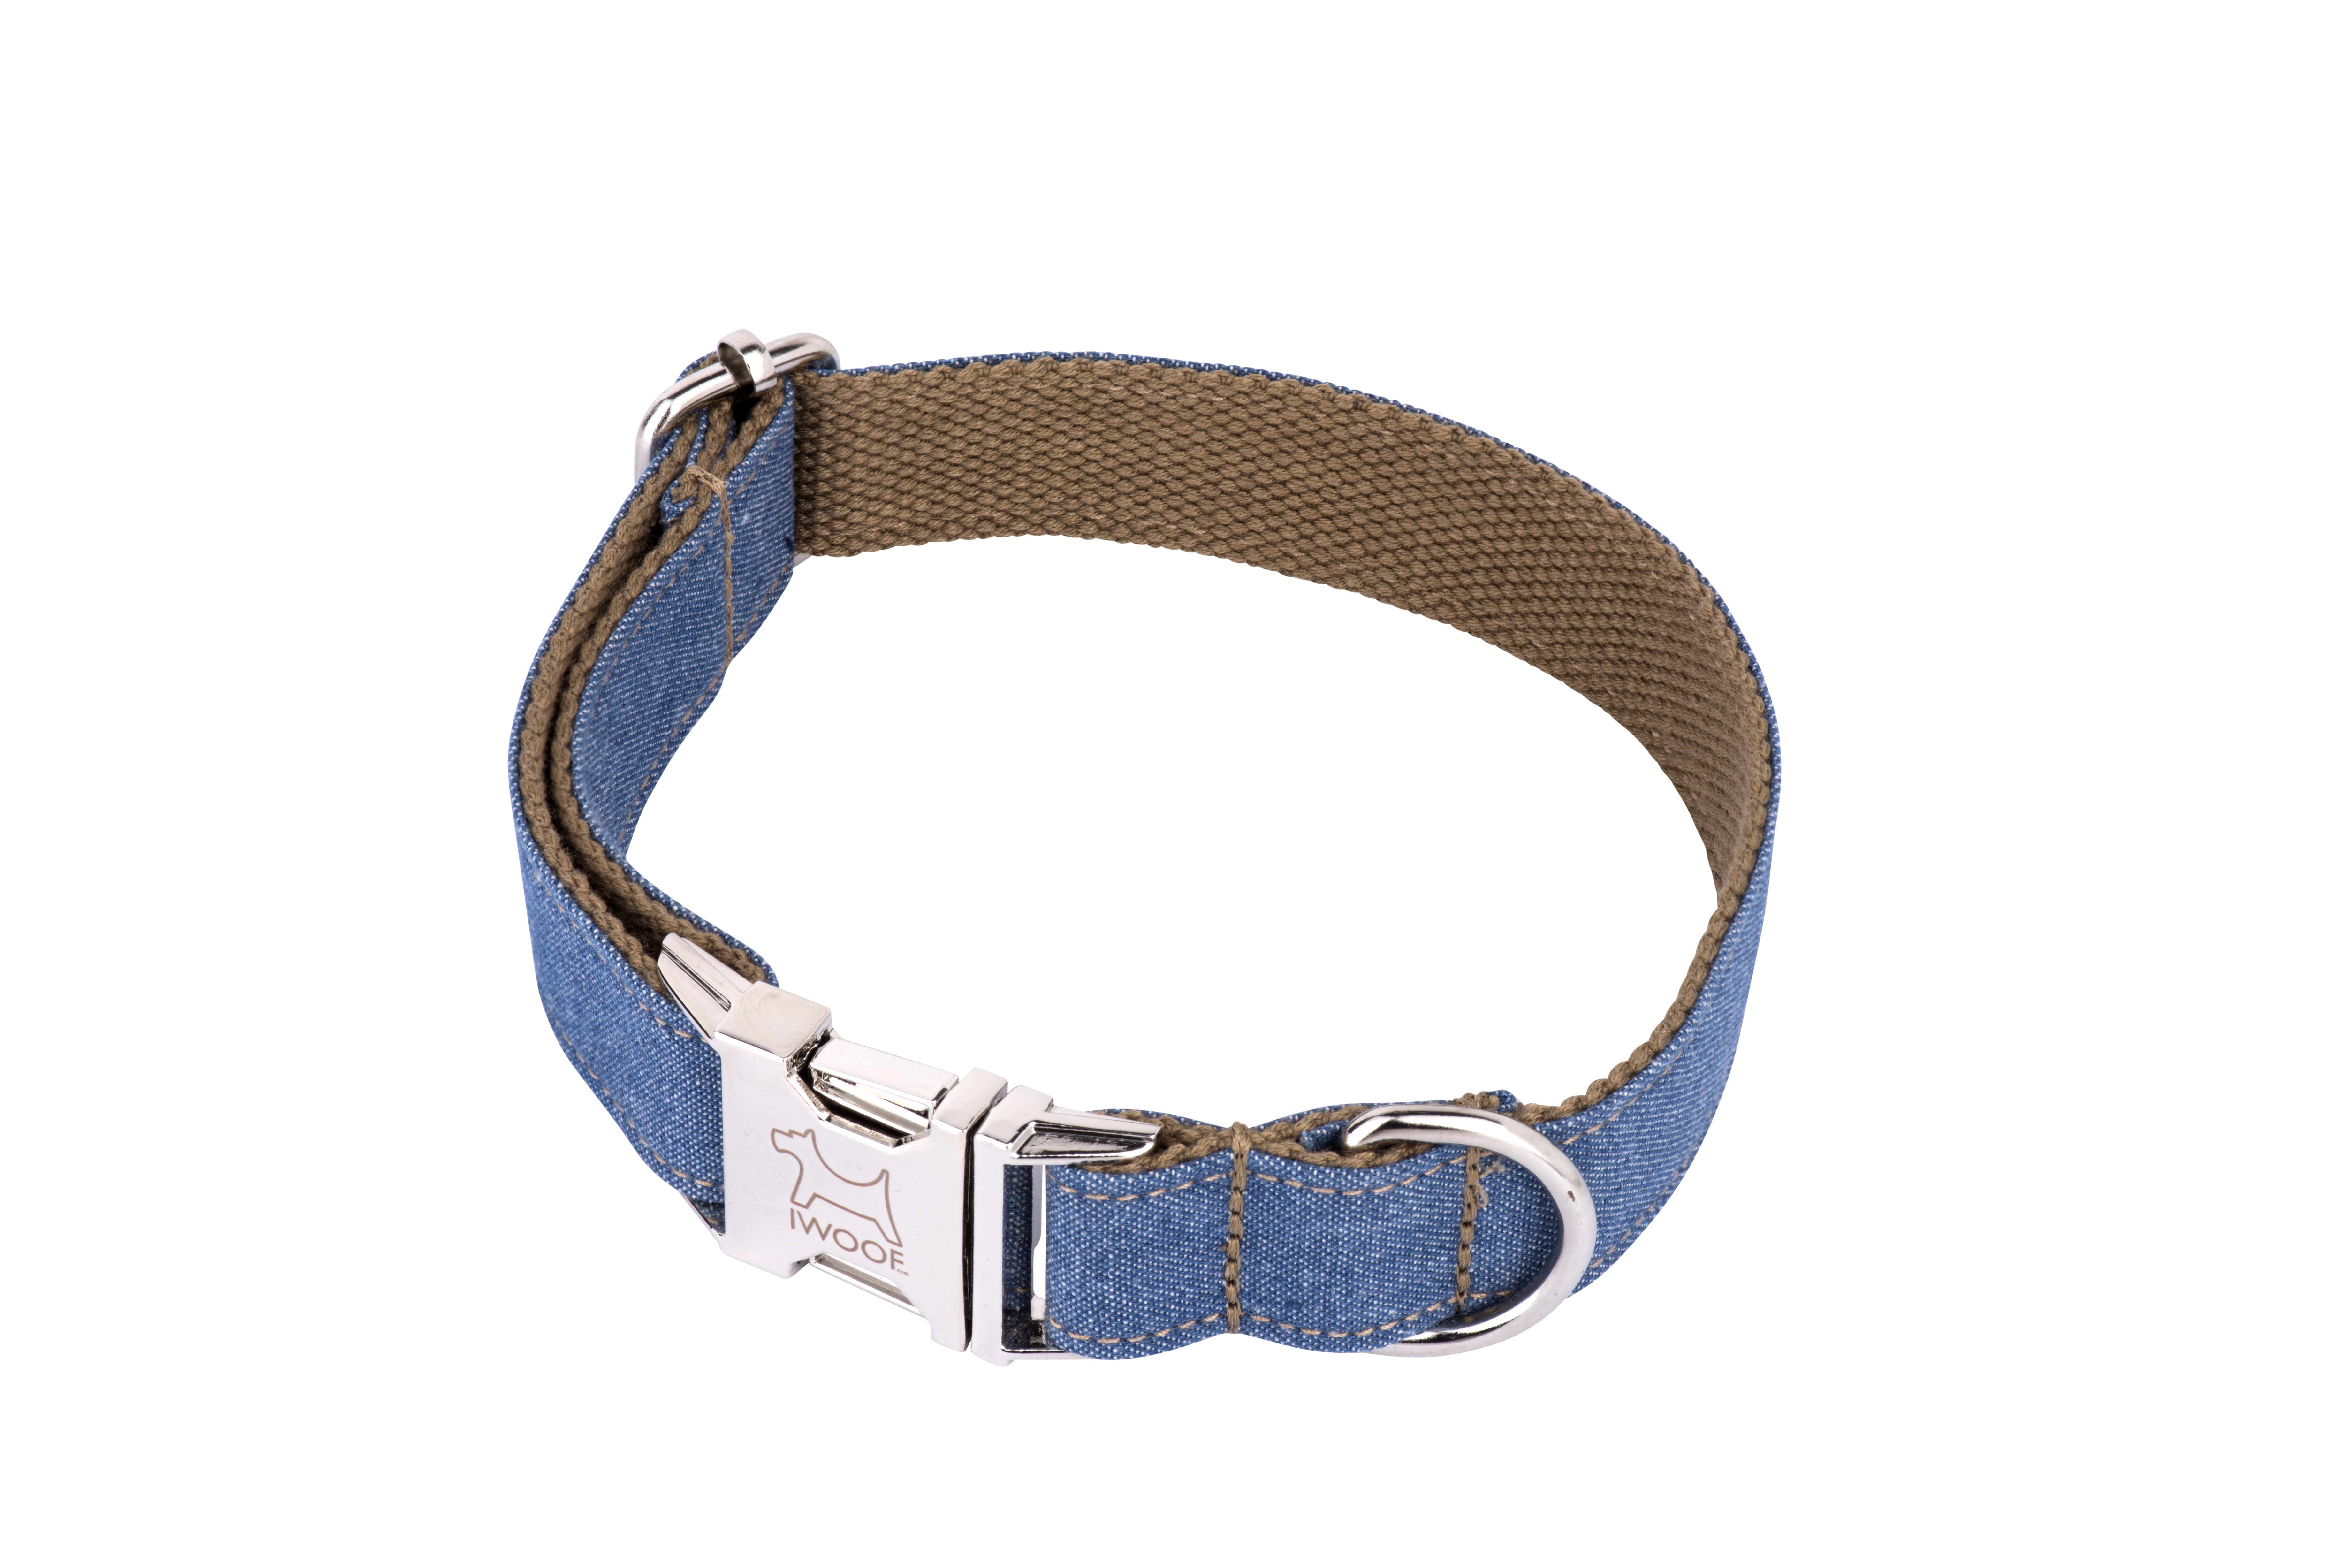 Jean designer dog collar and dog lead by IWOOF